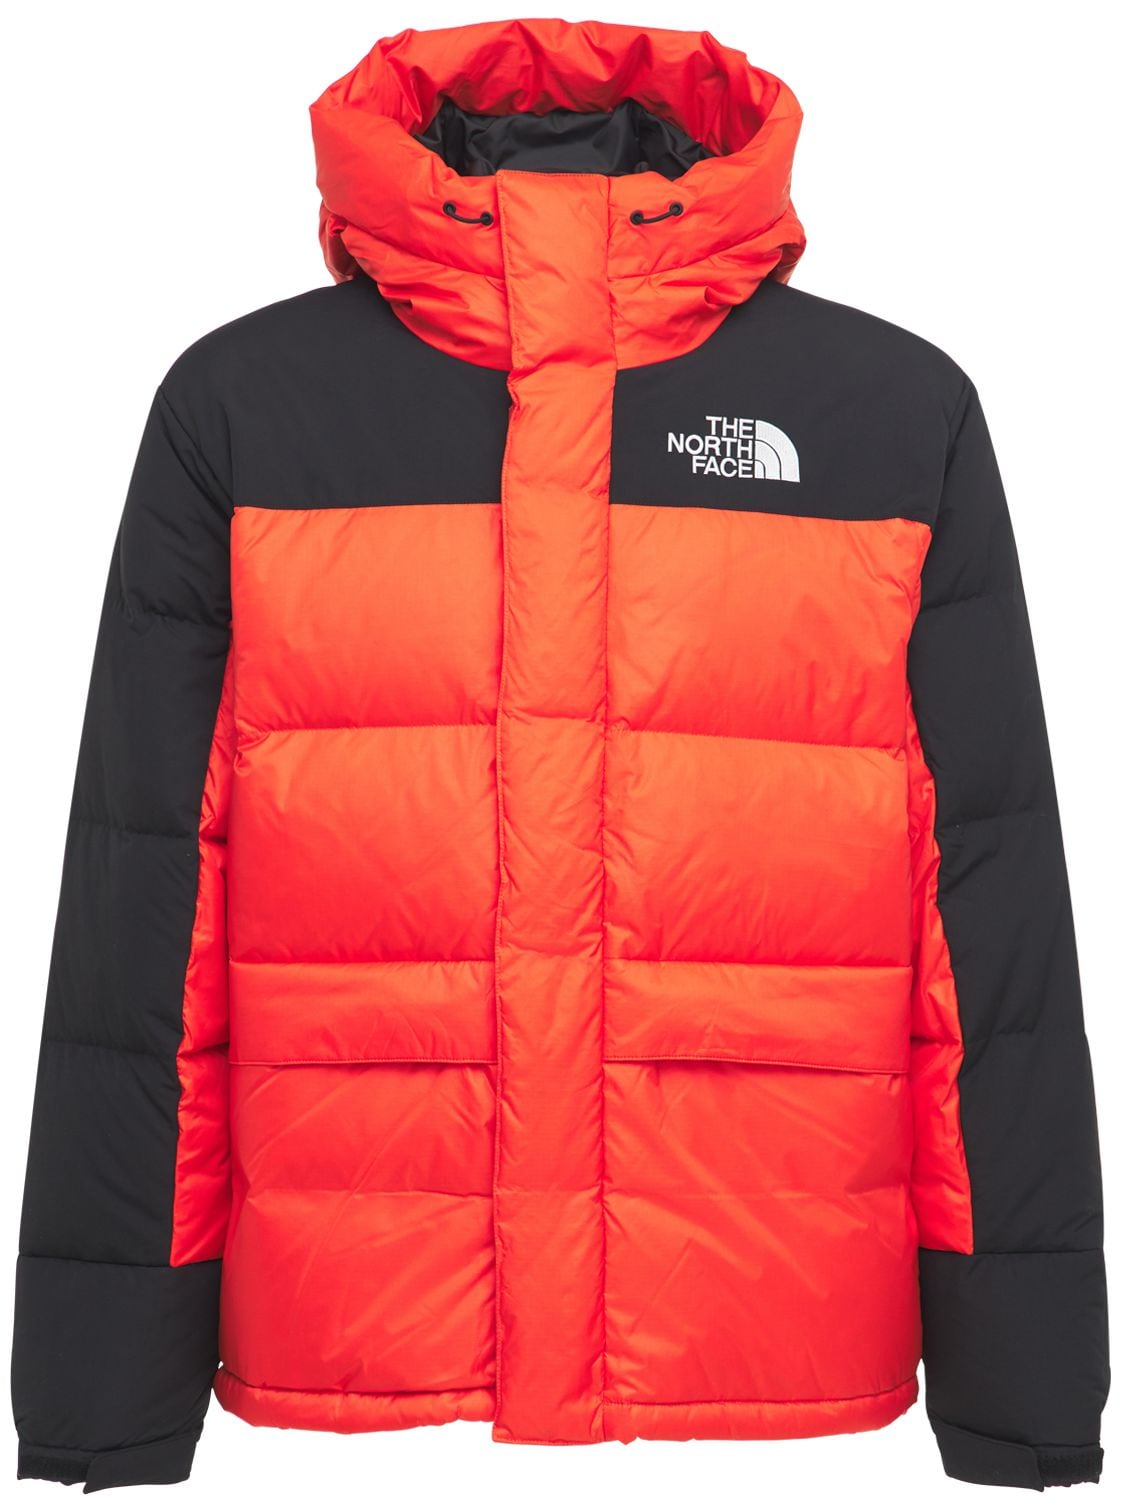 THE NORTH FACE HIMALAYAN DOWN JACKET,73IY8Z004-UJE10